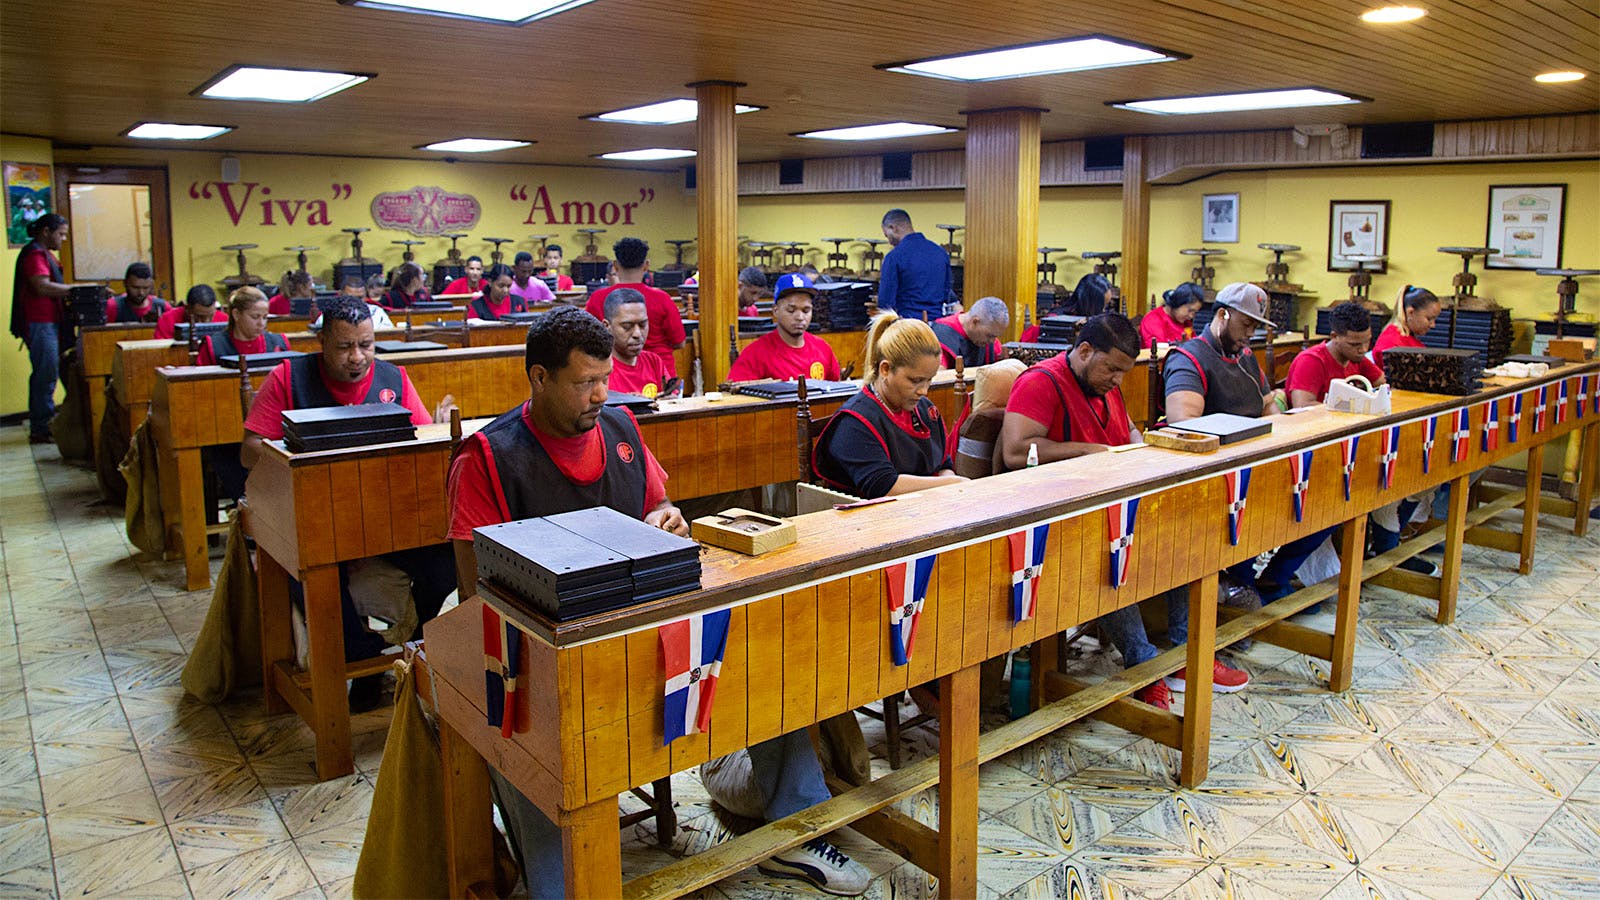 The Fuente Fuente OpusX rolling gallery, dedicated to only making one brand, which is one of the hardest to find cigars in the world.